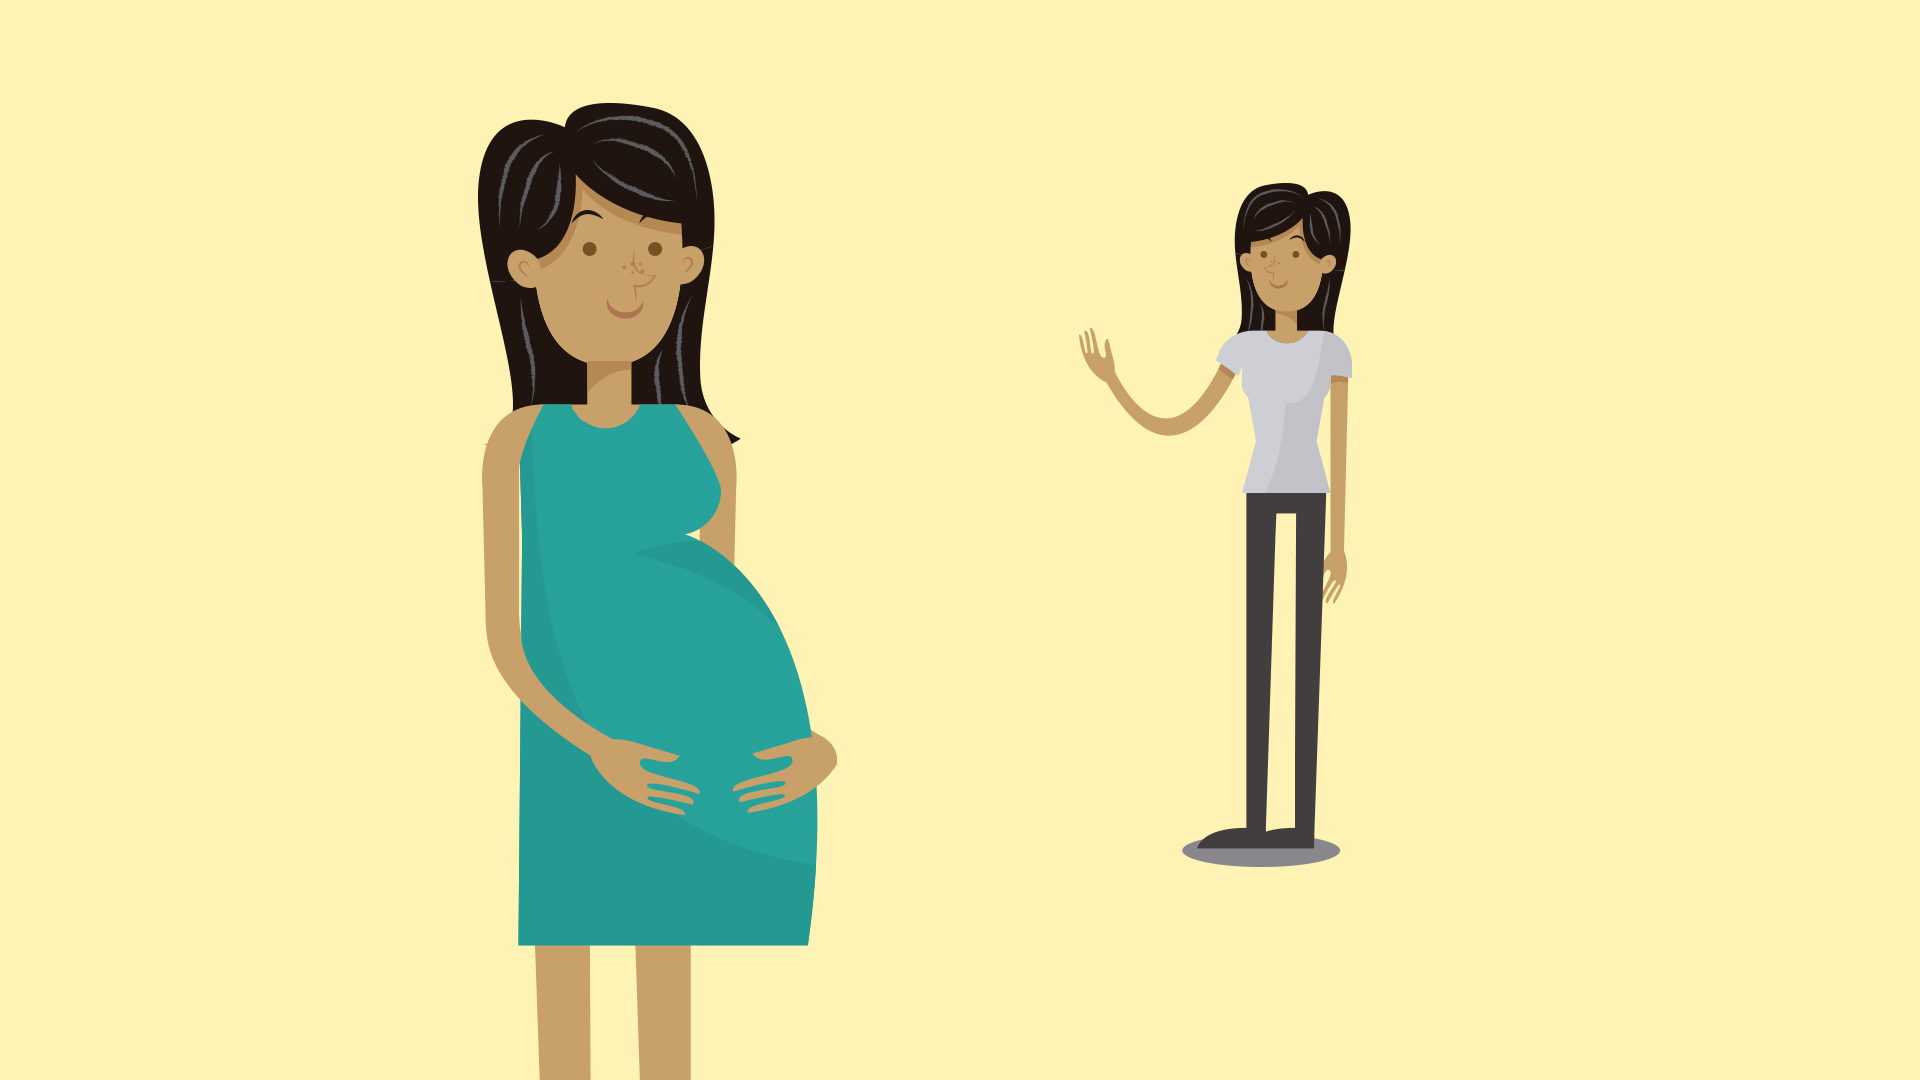 Character design for a 2D animated pregnant woman.